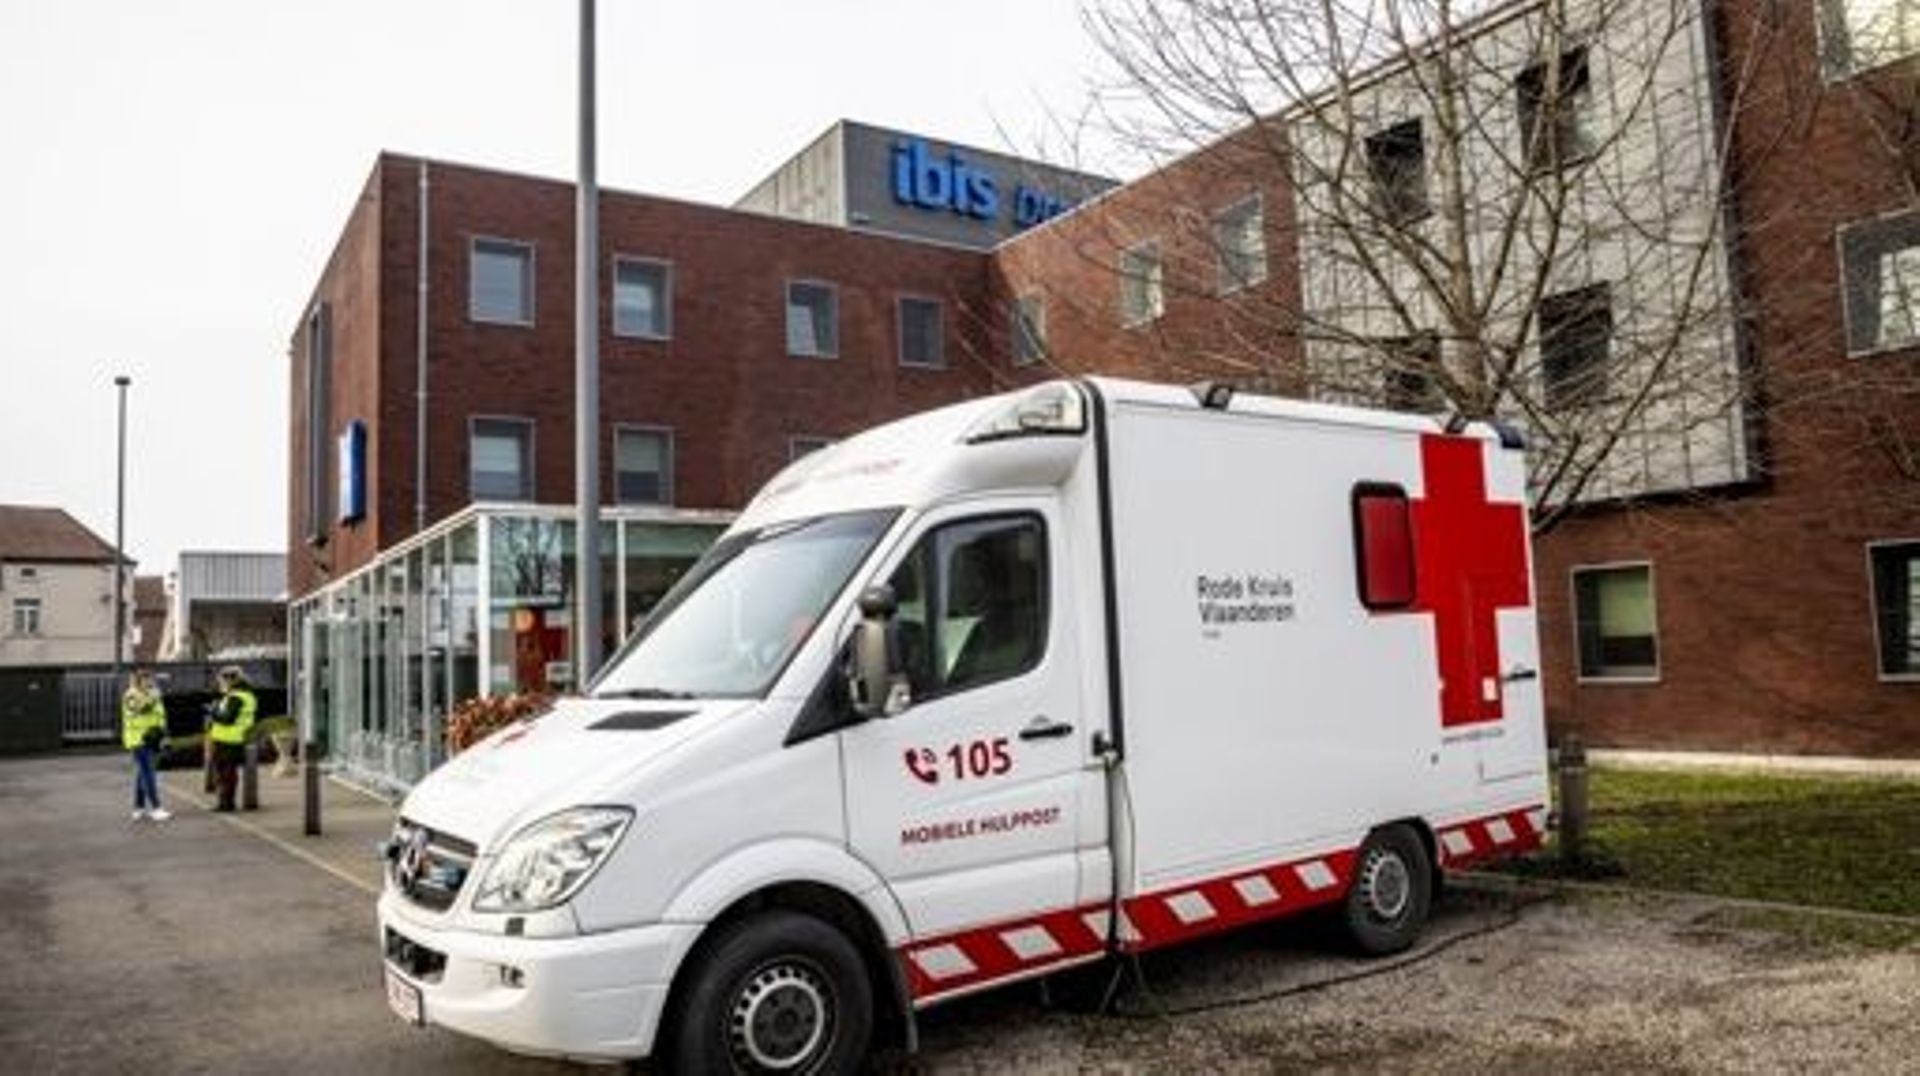 Illustration picture shows a red cross vehicle at the Ibis Budget Hotel in Ruisbroek, Sint-Pieters-Leeuw, Thursday 16 February 2023. Following the evacuation of the squatted so-called Palais des Droits – Rechtenpaleis building, at the Paleizenstraat – Rue